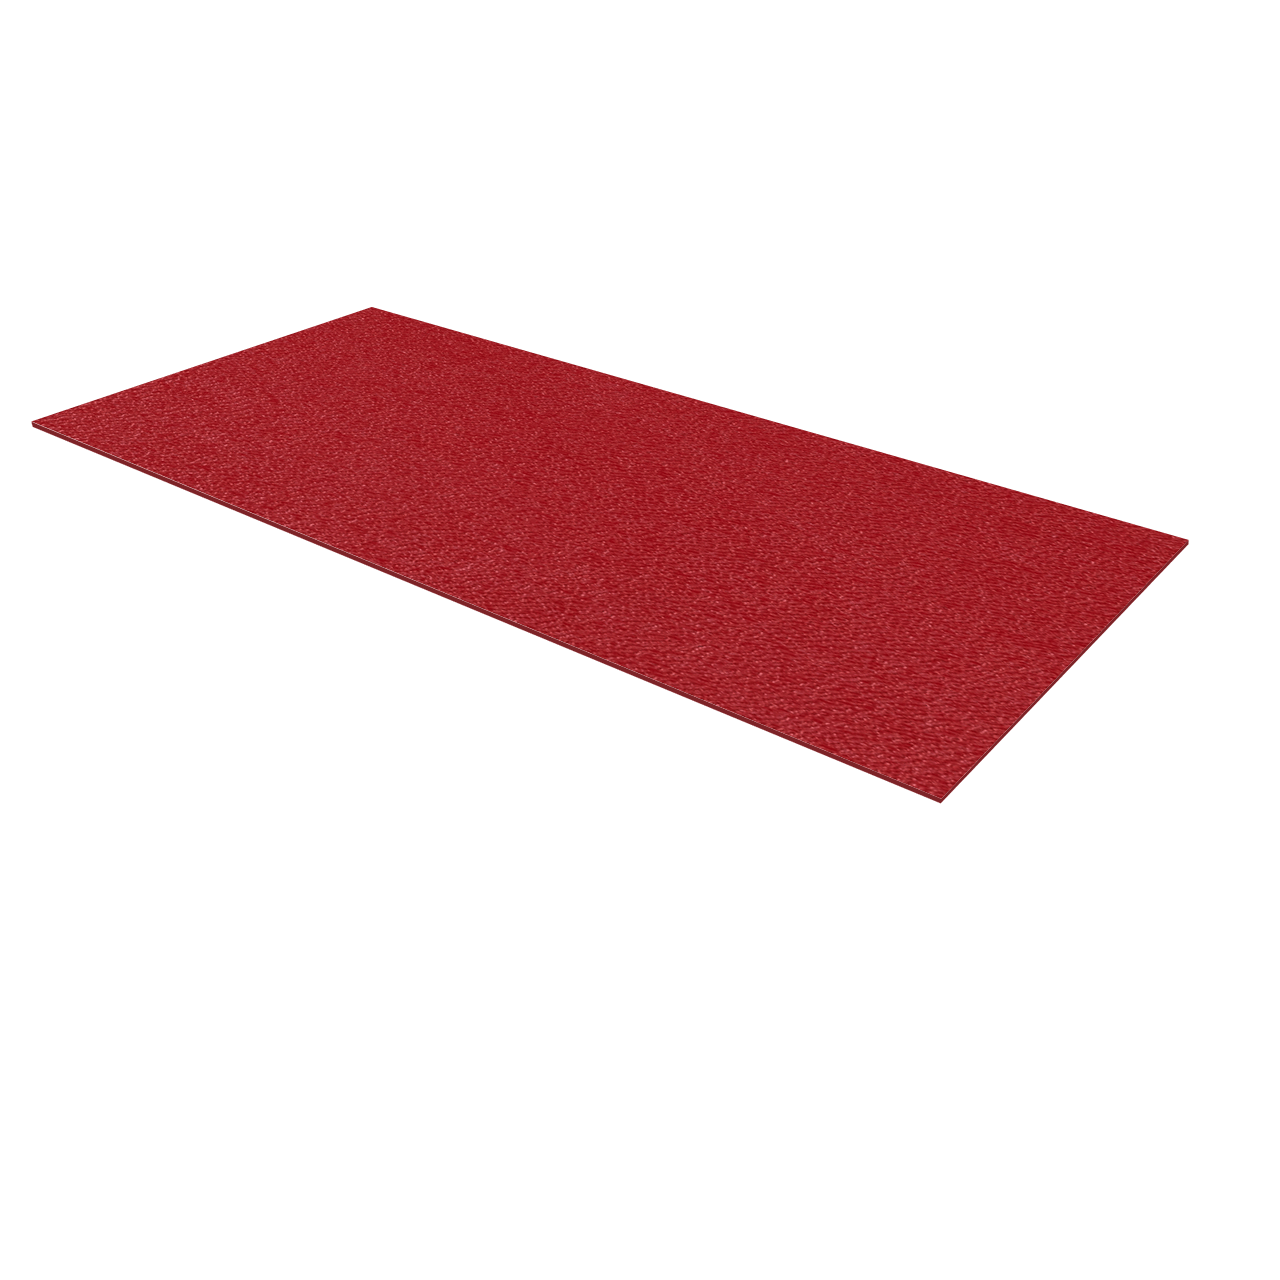 ABS Plastic Sheet - Red